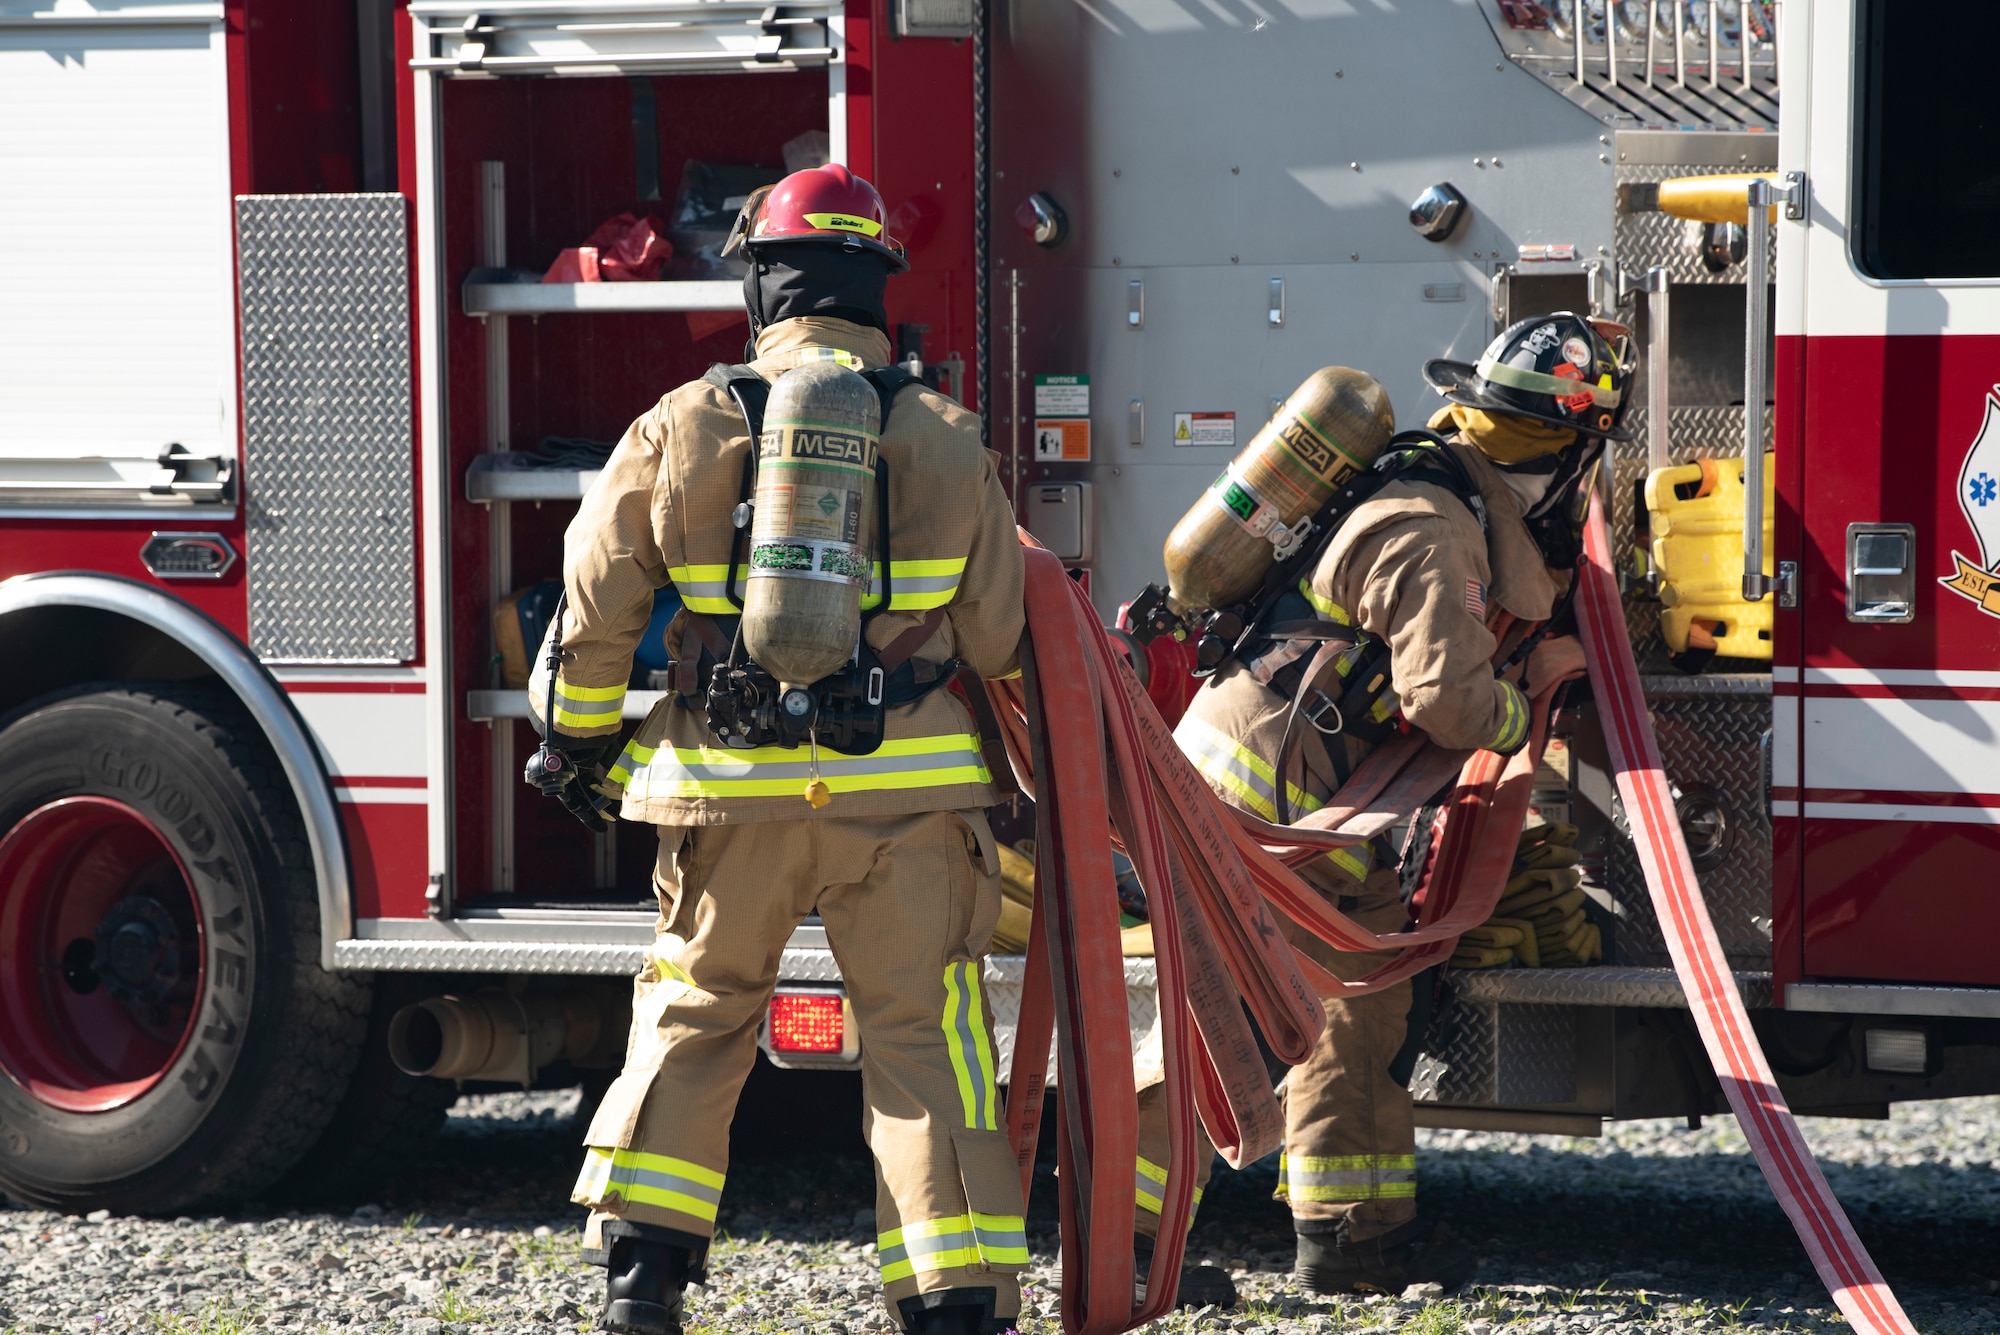 A photo of two members next to a fire stuck in fire fighter suits pulling a hose away from the fire truck.